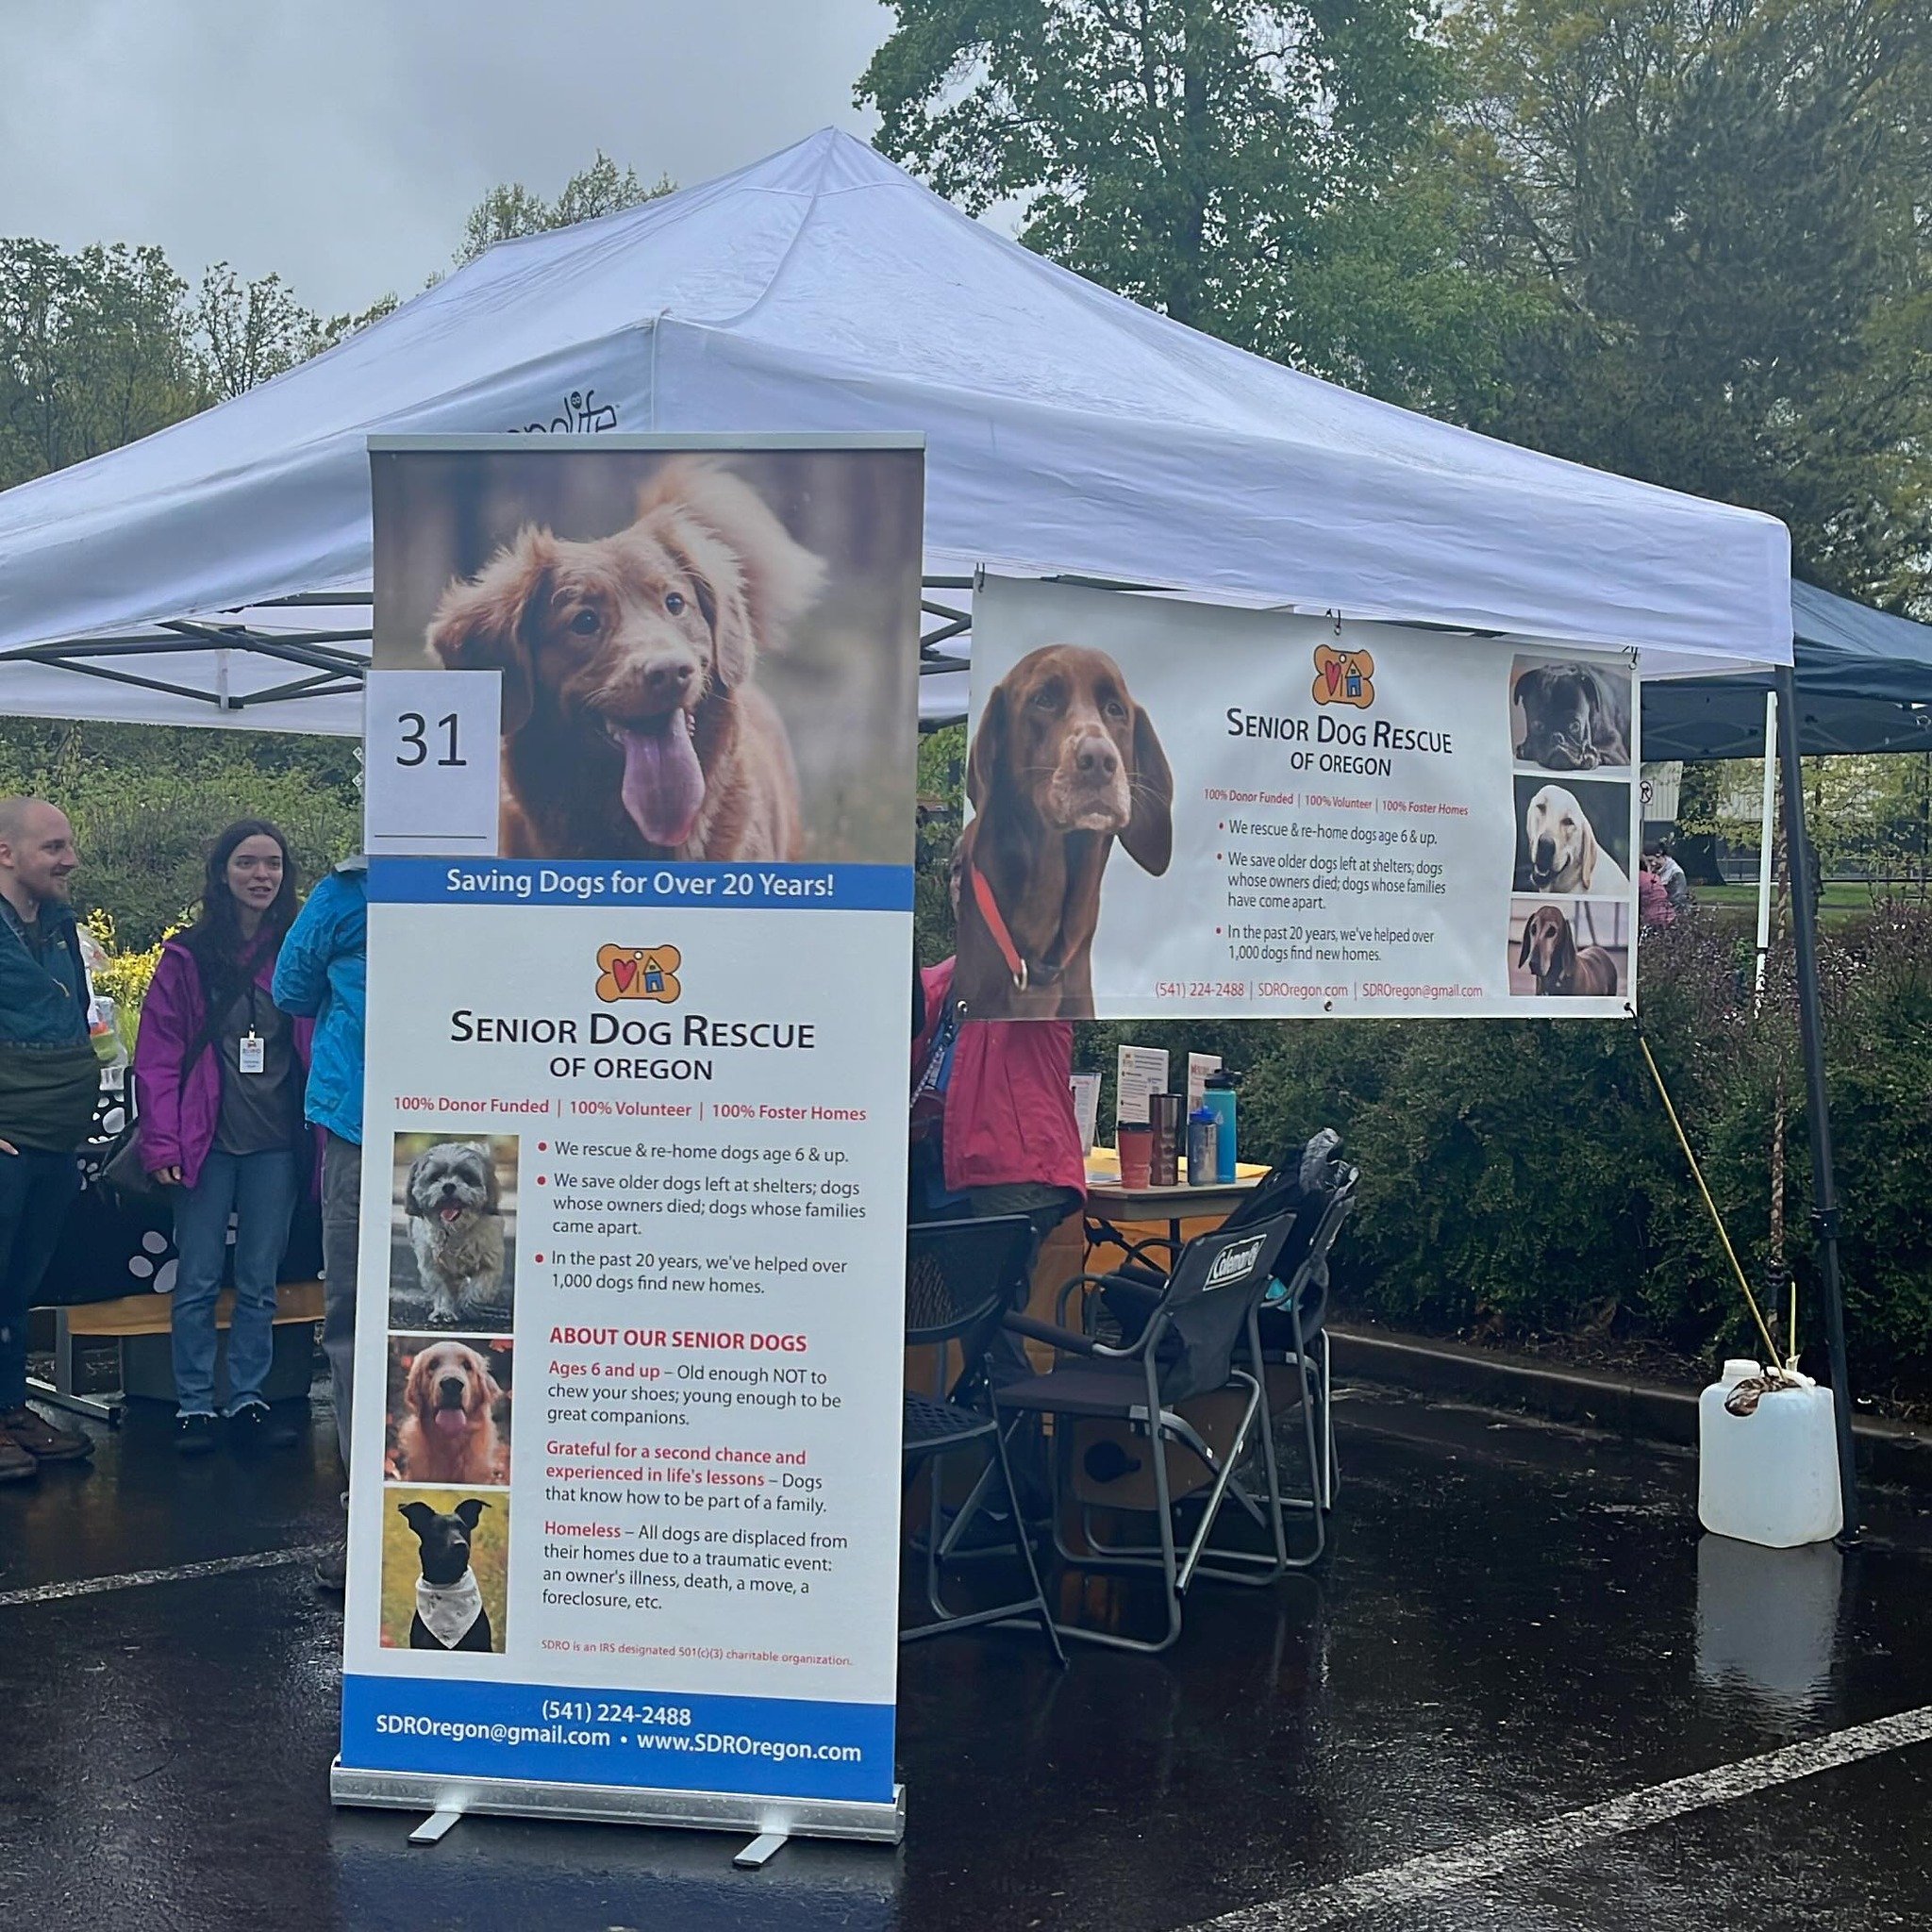 🐾🎉Hot doggity dog! 🎉🐾

We are here celebrating OSU&rsquo;s Pet Day! We've got raffle prizes, free stickers and you can get the first peek at our Friends program! We are ready to meet all of you! 🐶😊